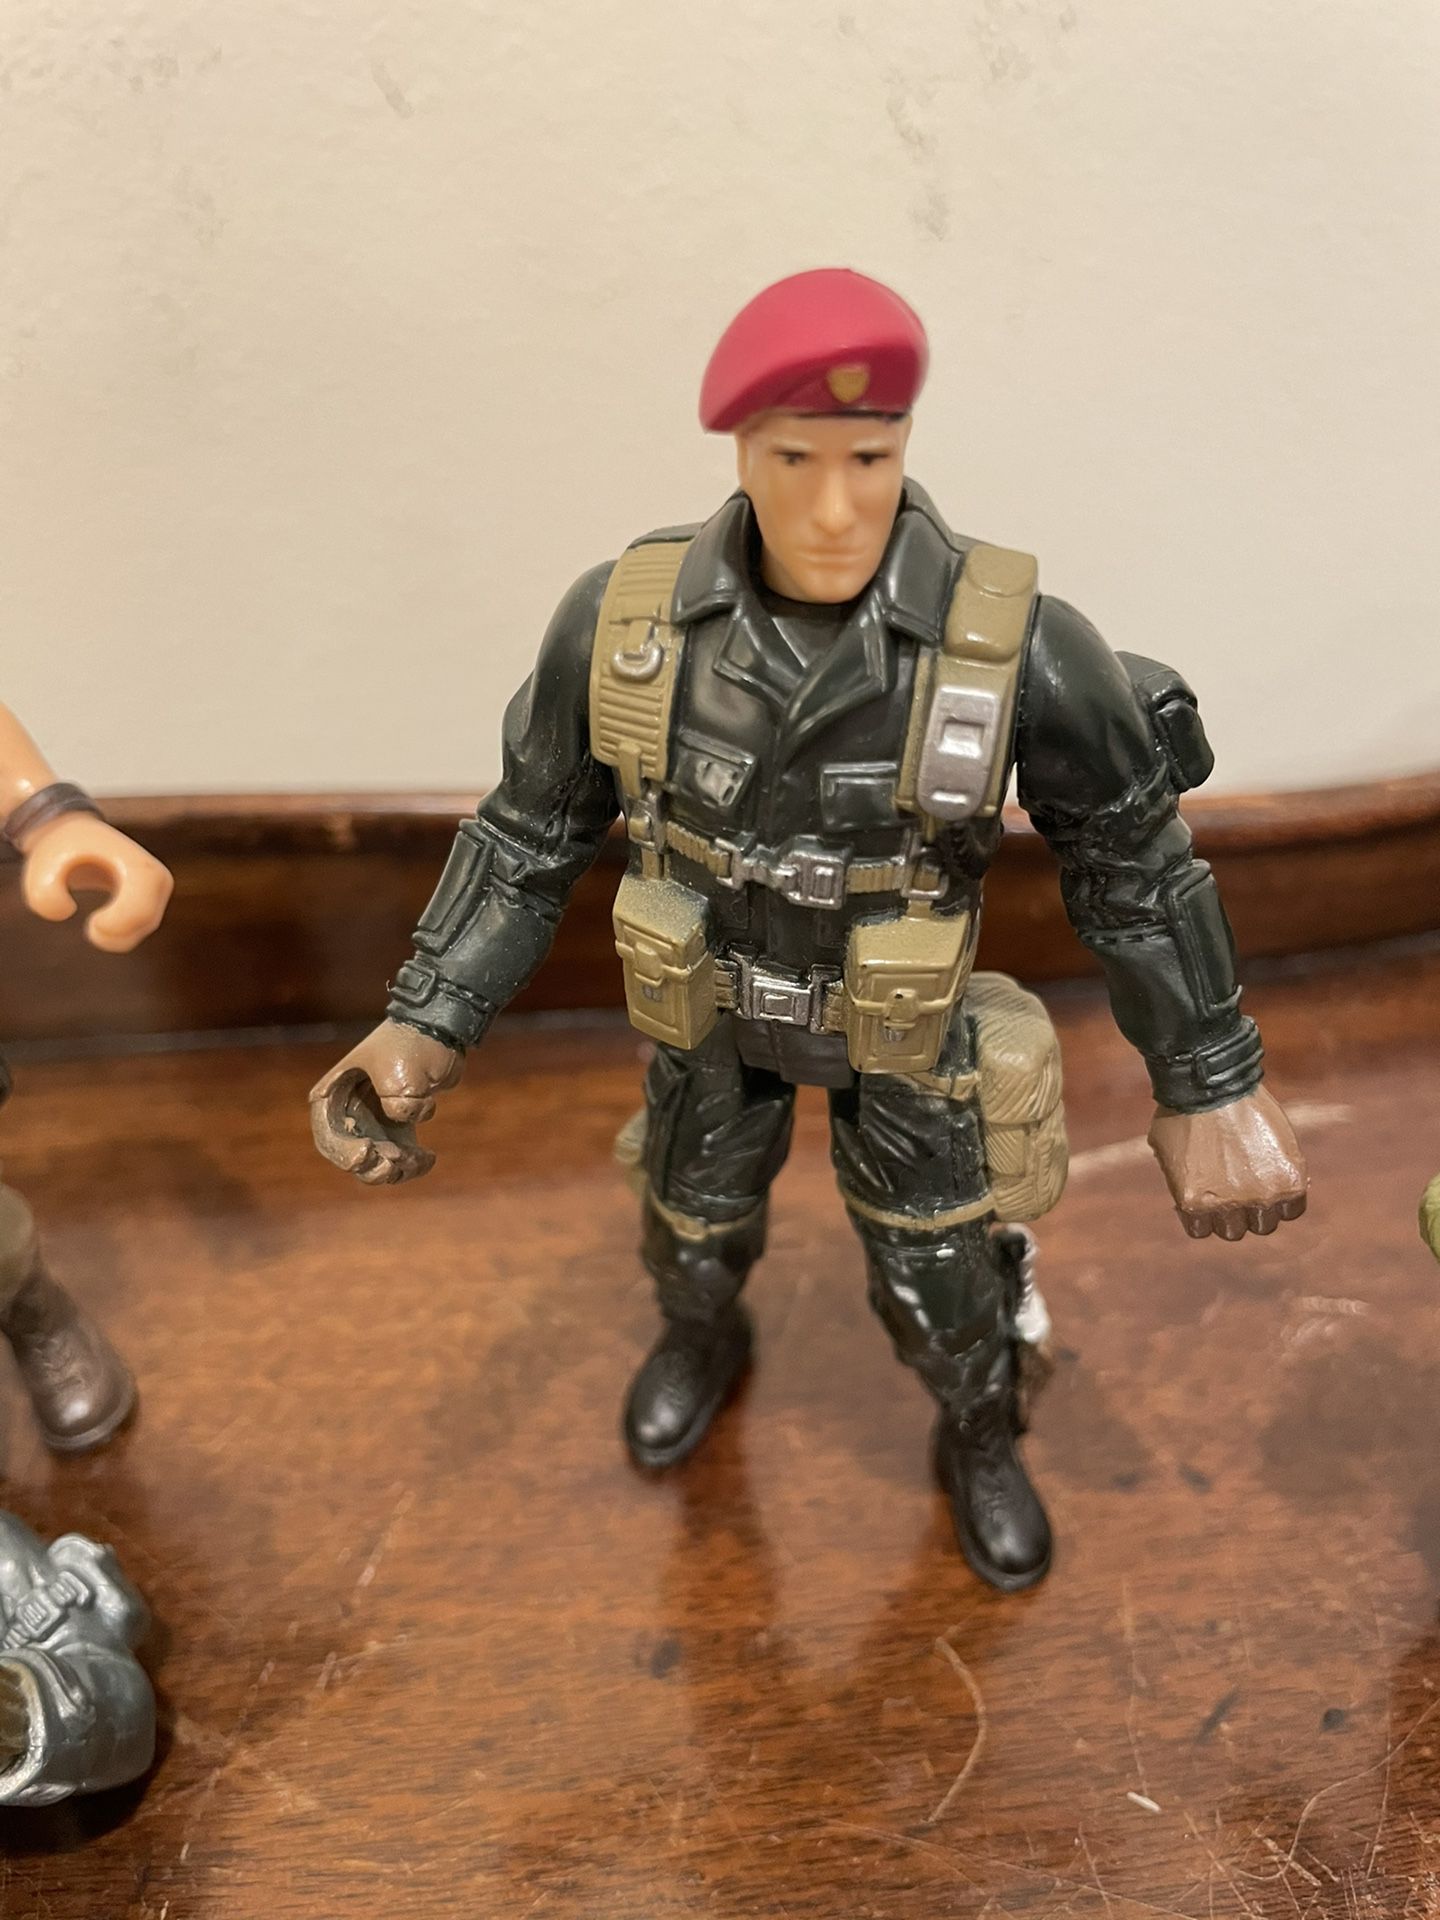 Chap Mei Rescue Squad And Mixed Action Figure Military Lot Of 9. Condition is pre owned and overall very solid and respectable shape. Every figure pic